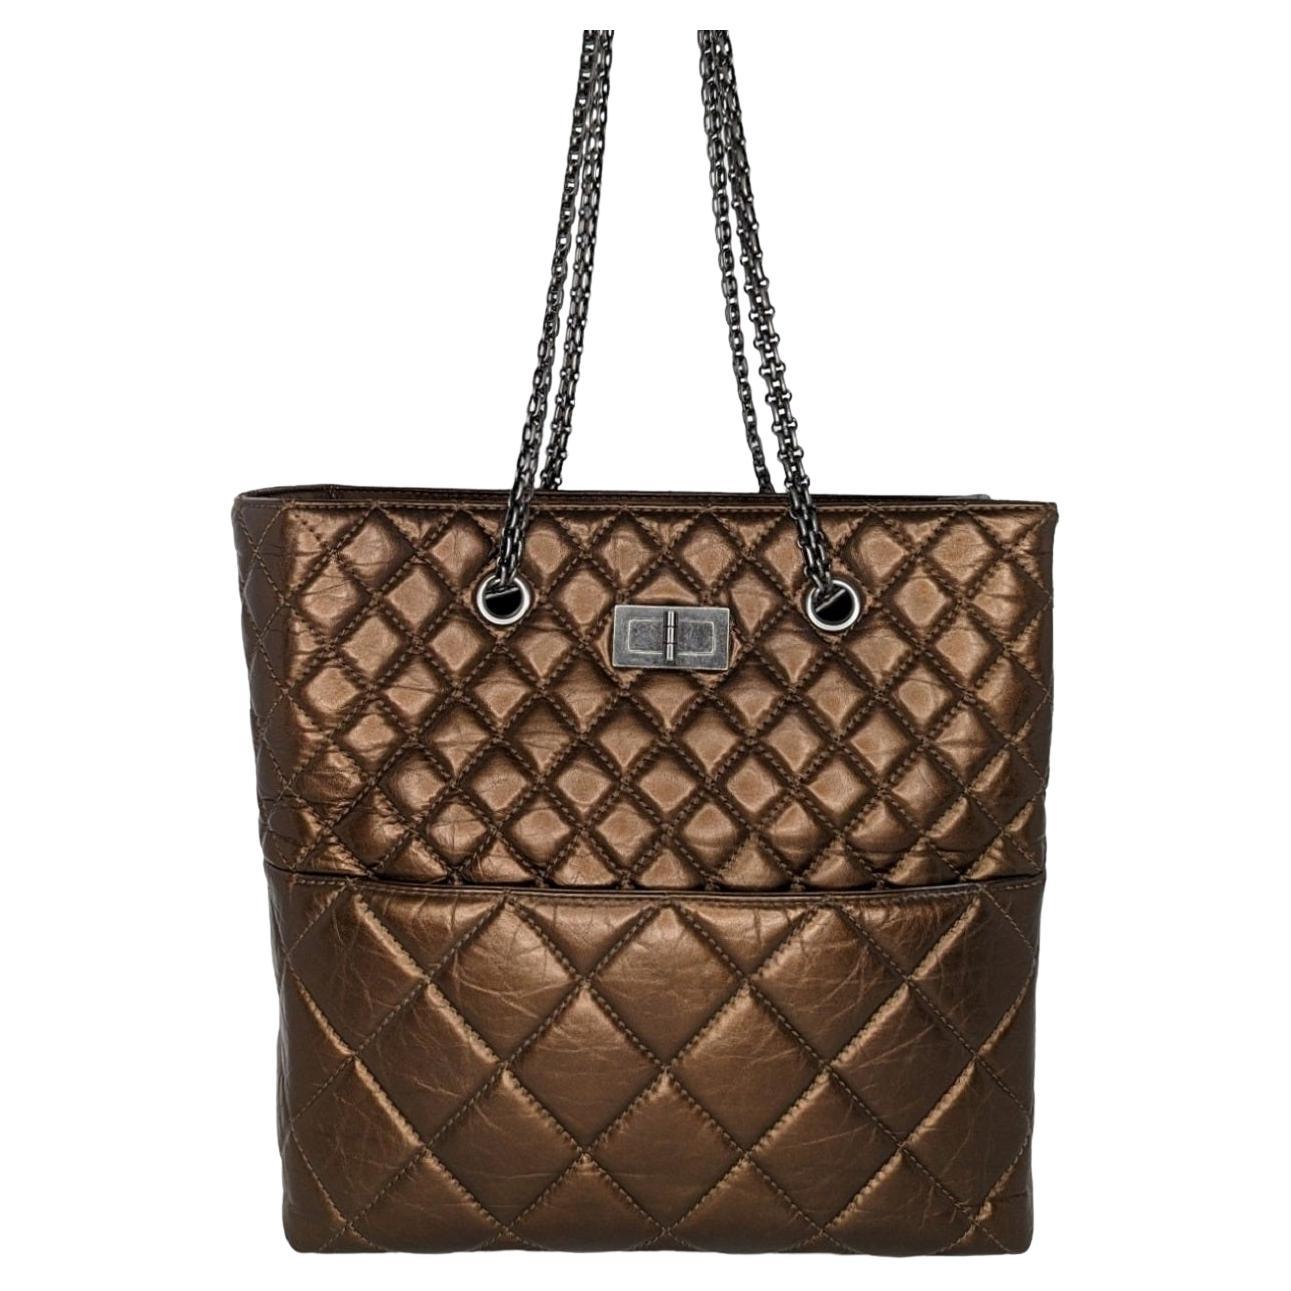 Chanel 2017 Quilted Large Easy Shopping Tote, $3,200